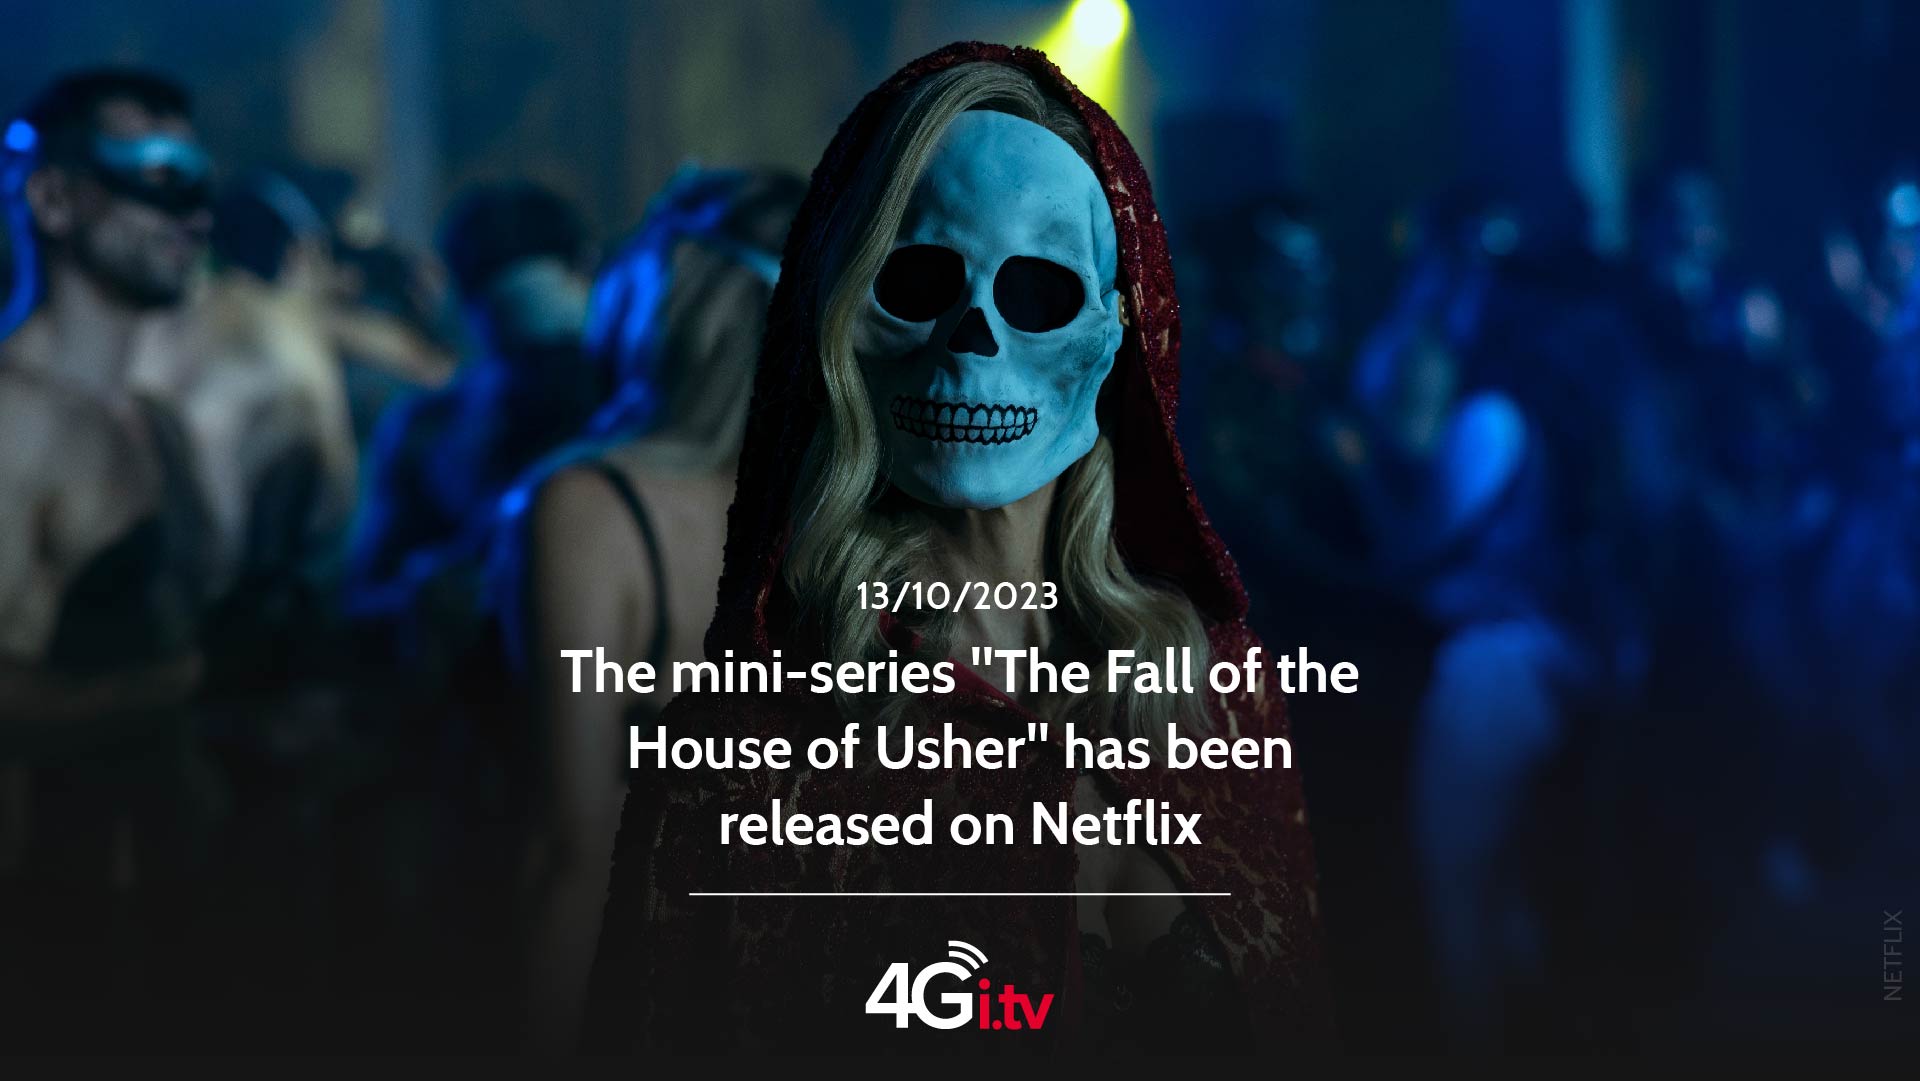 Подробнее о статье The mini-series “The Fall of the House of Usher” has been released on Netflix